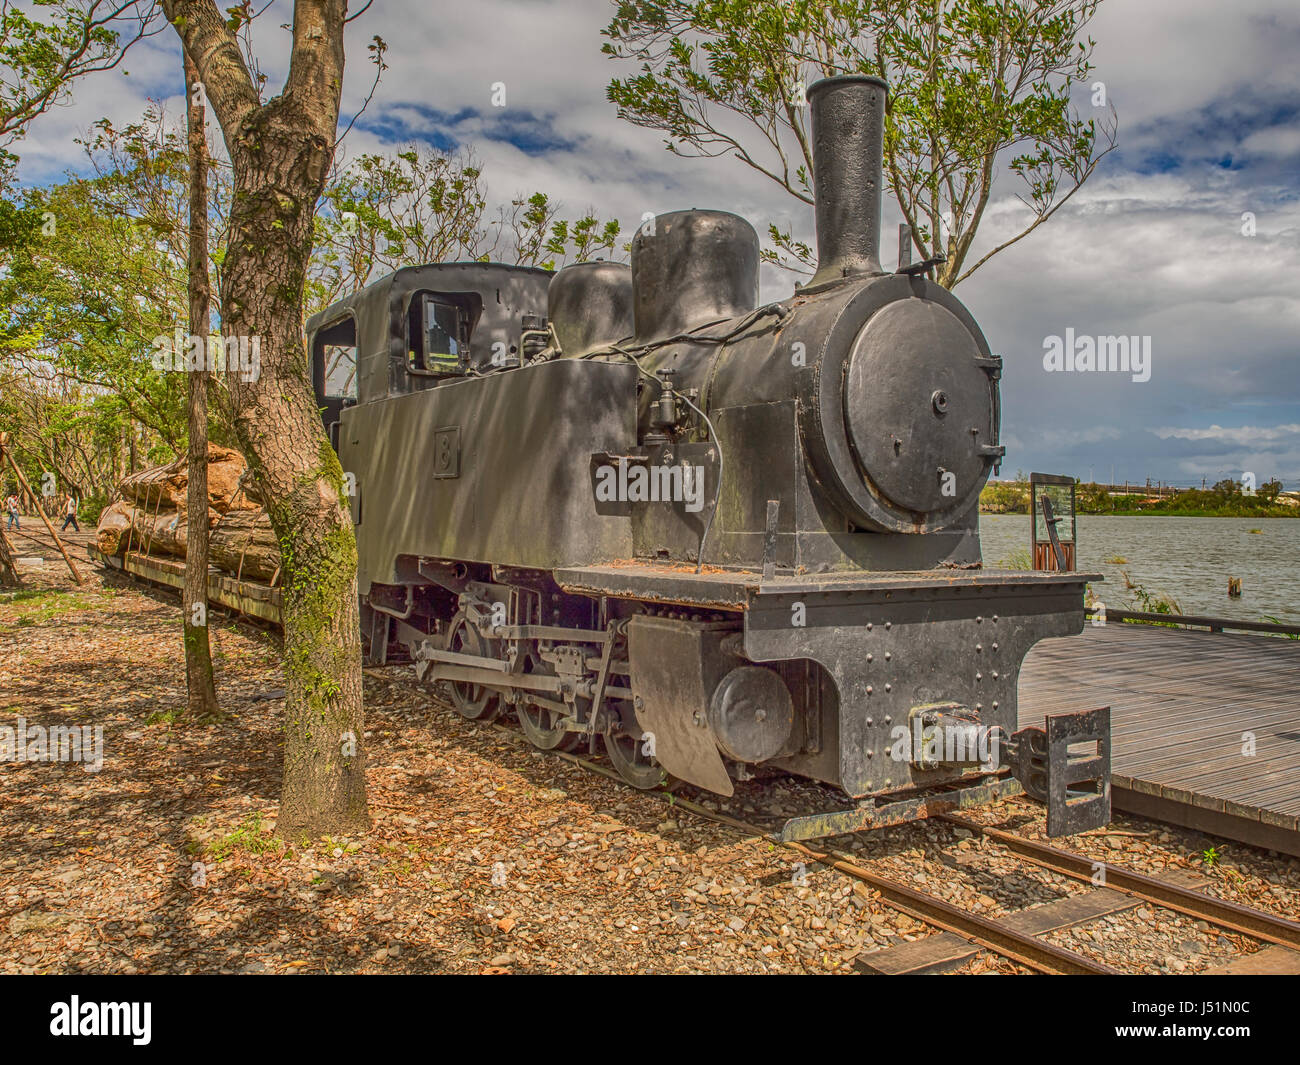 Luodong, Taiwan - October 18, 2016: A locomotive train carrying camphor tree in Luodong Forestry Culture Garden Stock Photo